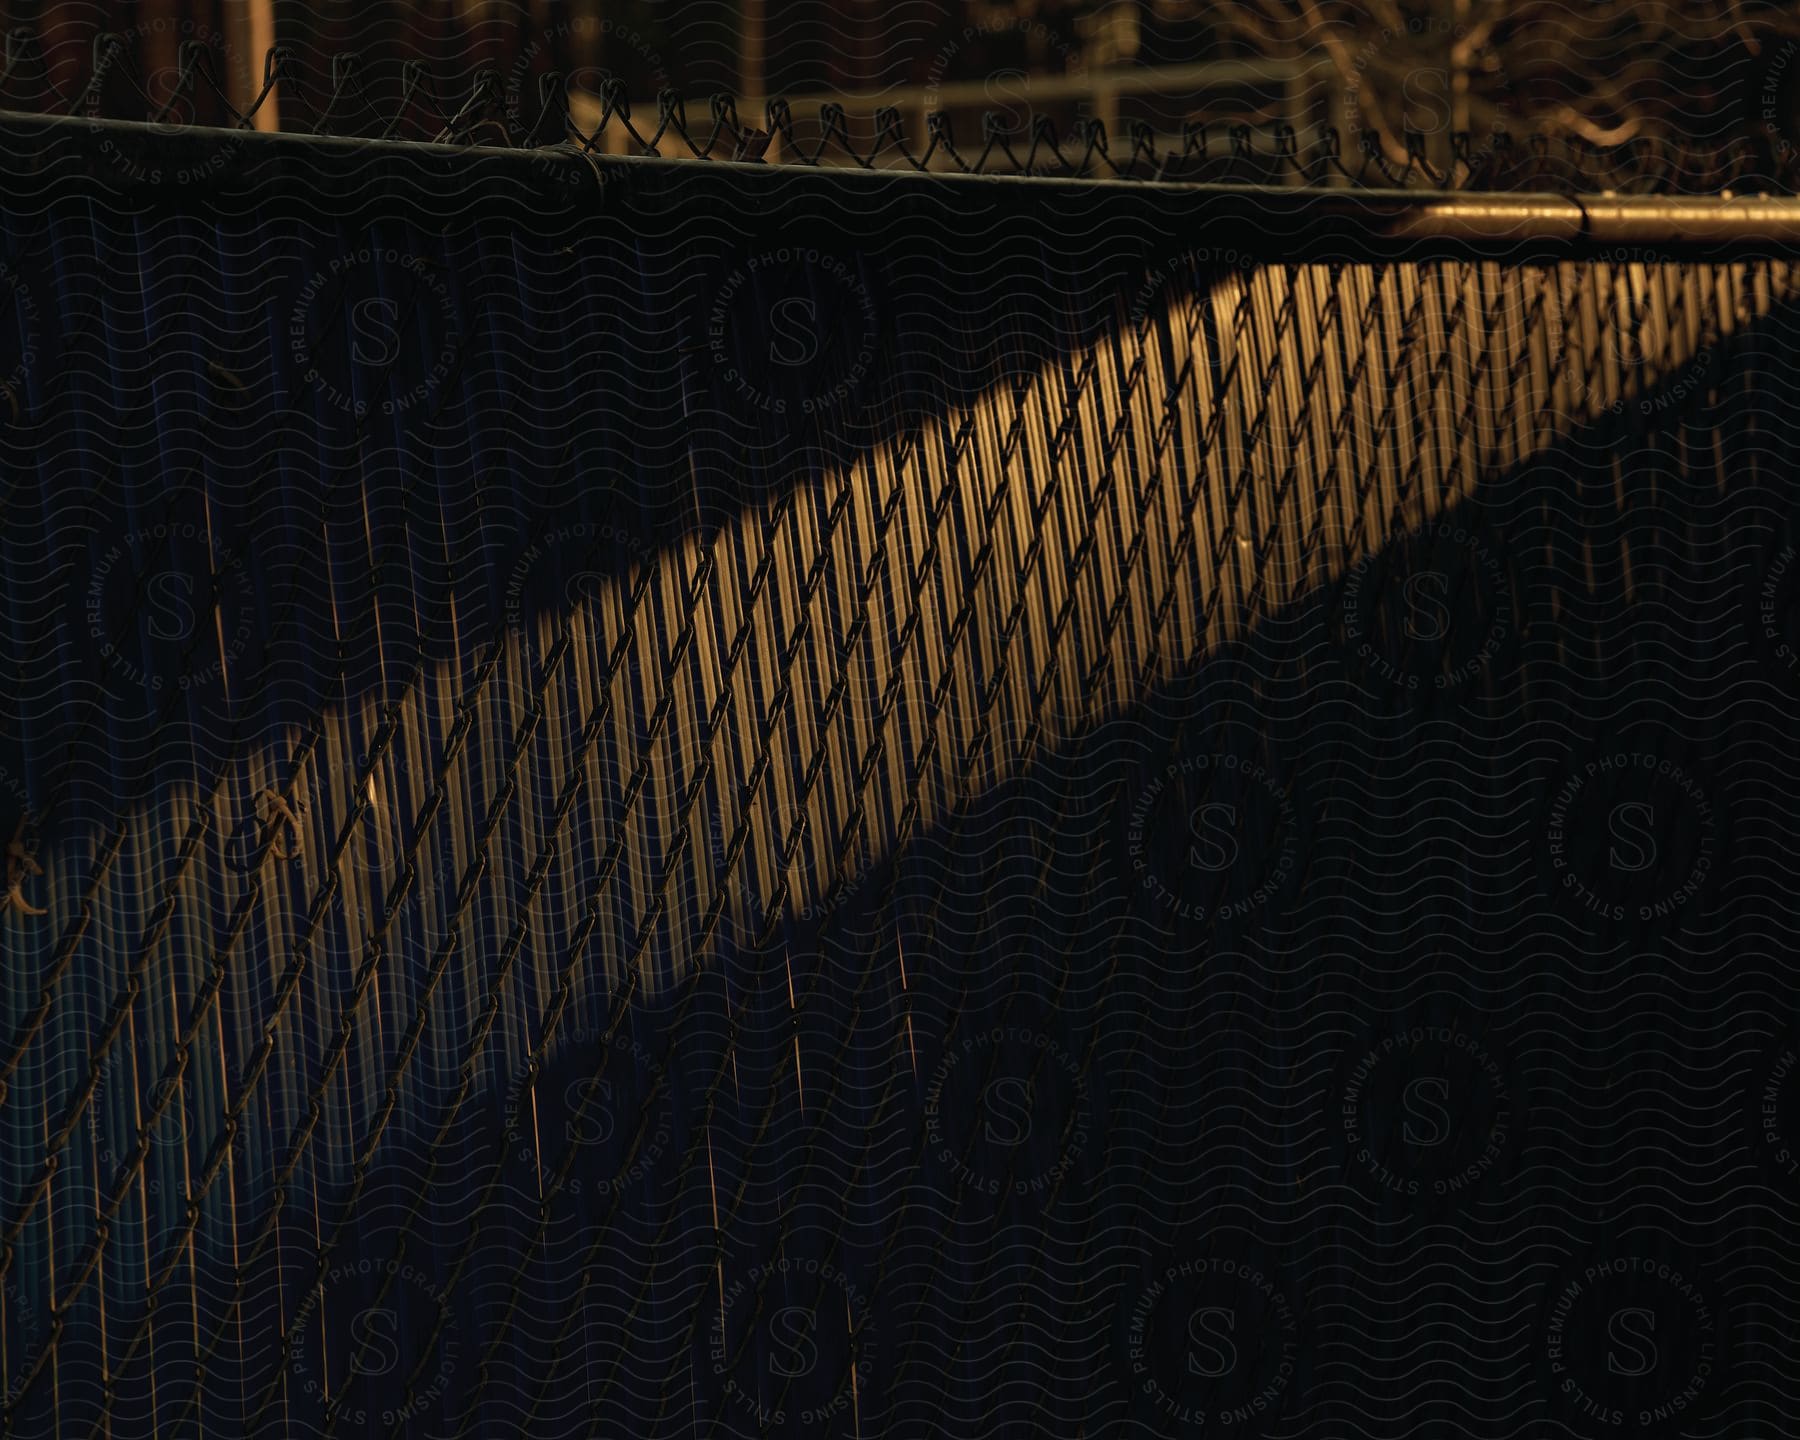 A chain link fence in an outdoor setting